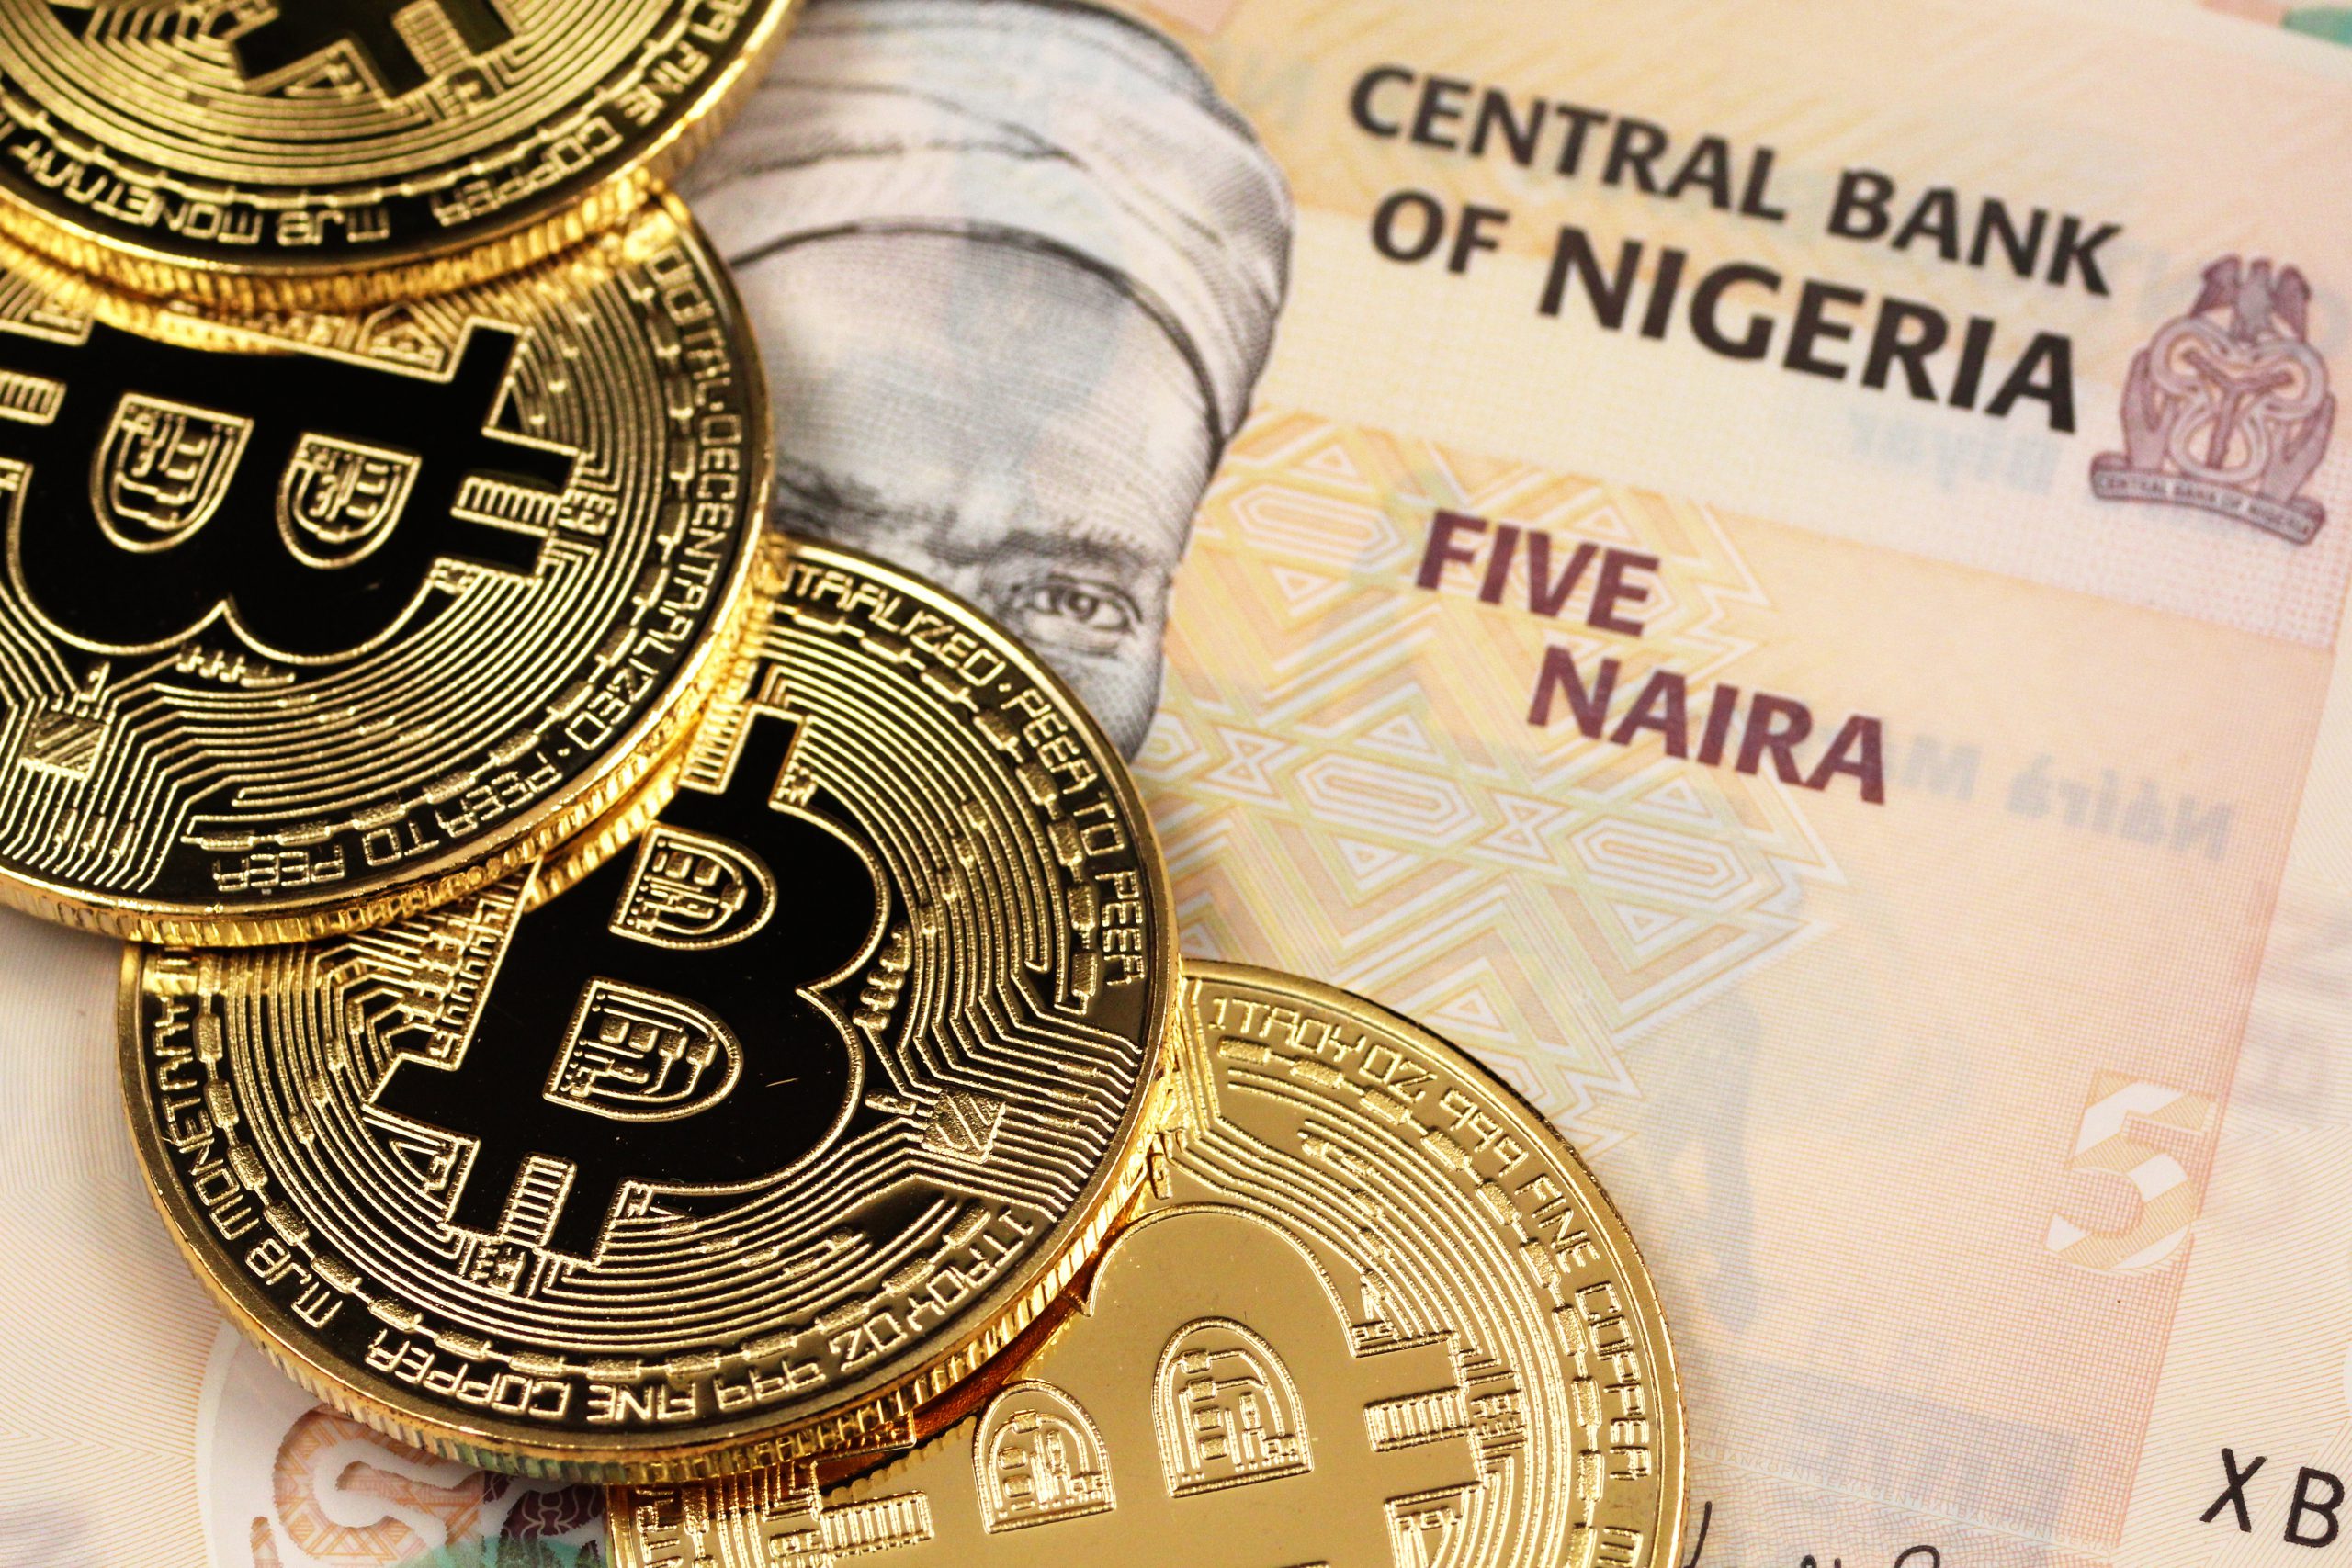 Nigeria is most interested in crypto according to Google Trends
